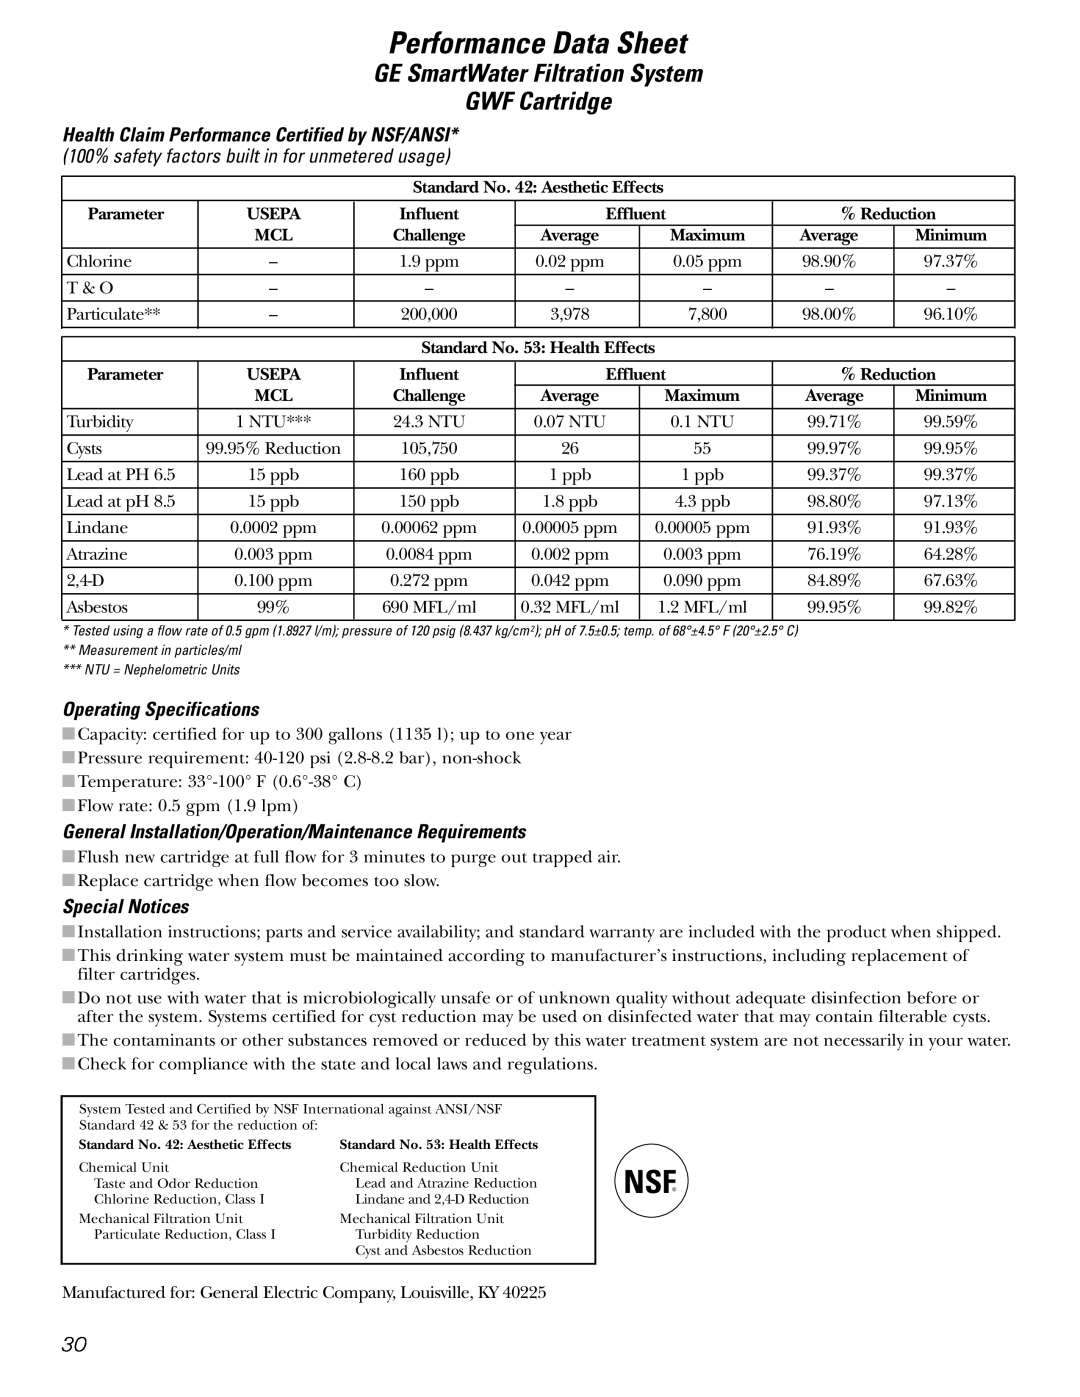 GE 25 Performance Data Sheet, GE SmartWater Filtration System GWF Cartridge, Operating Specifications, Special Notices 